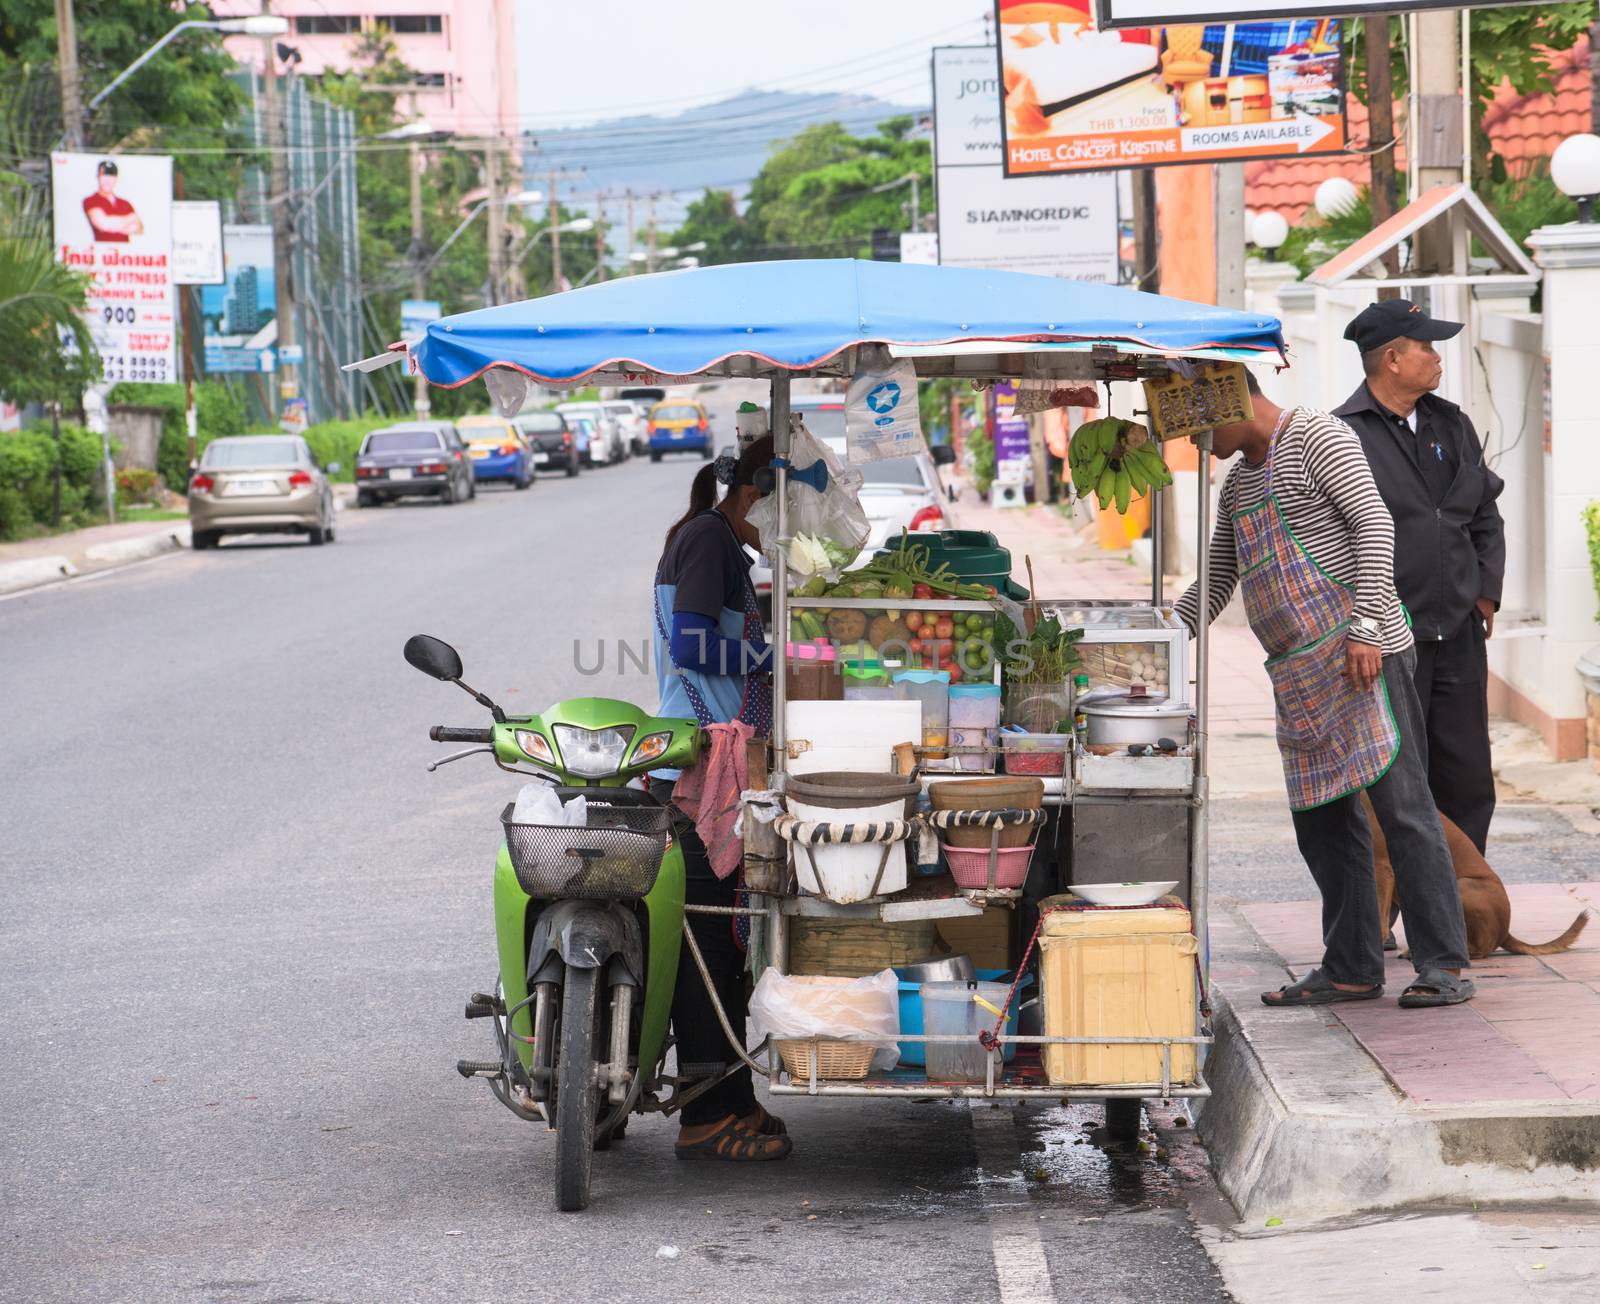 Pattaya City, Thailand - June 26, 2015: Thailand is famous for its street food, which is tasty and can be bought everywhere around the clock. Here’s a mobile kitchen selling meatballs and the spicy papaya salad, som tam.